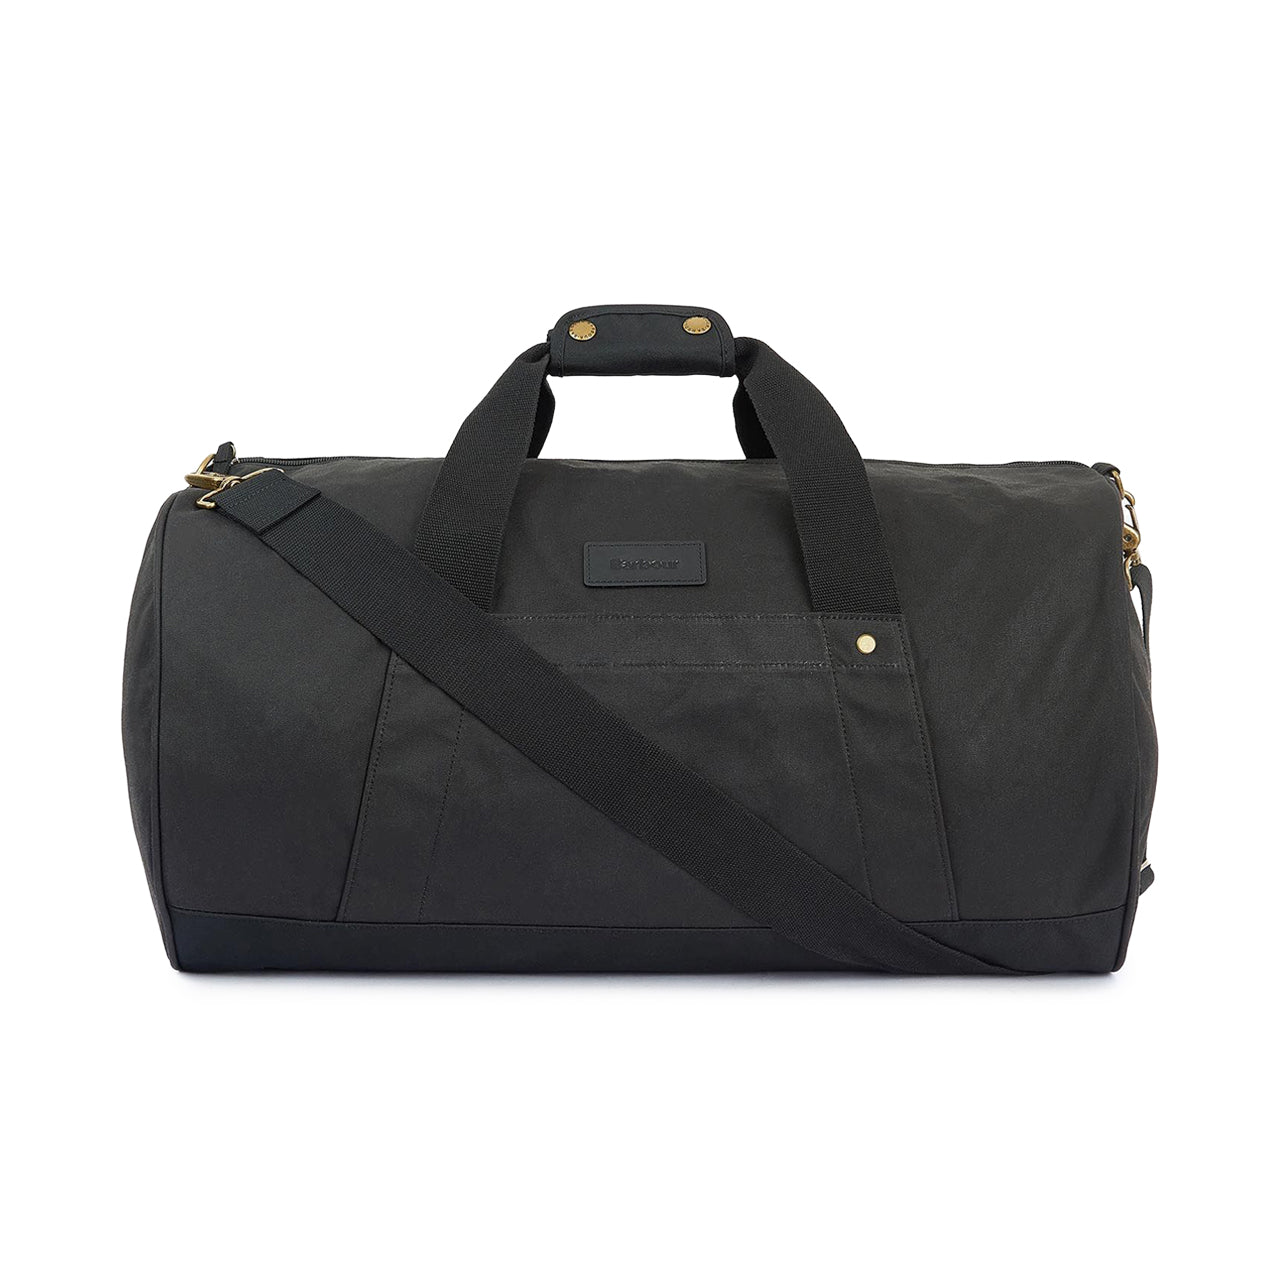 21 Timeless Waxed Canvas Duffle Bags Options for Travel  Canvas duffle bag,  Waxed canvas duffle bag, Leather duffle bag